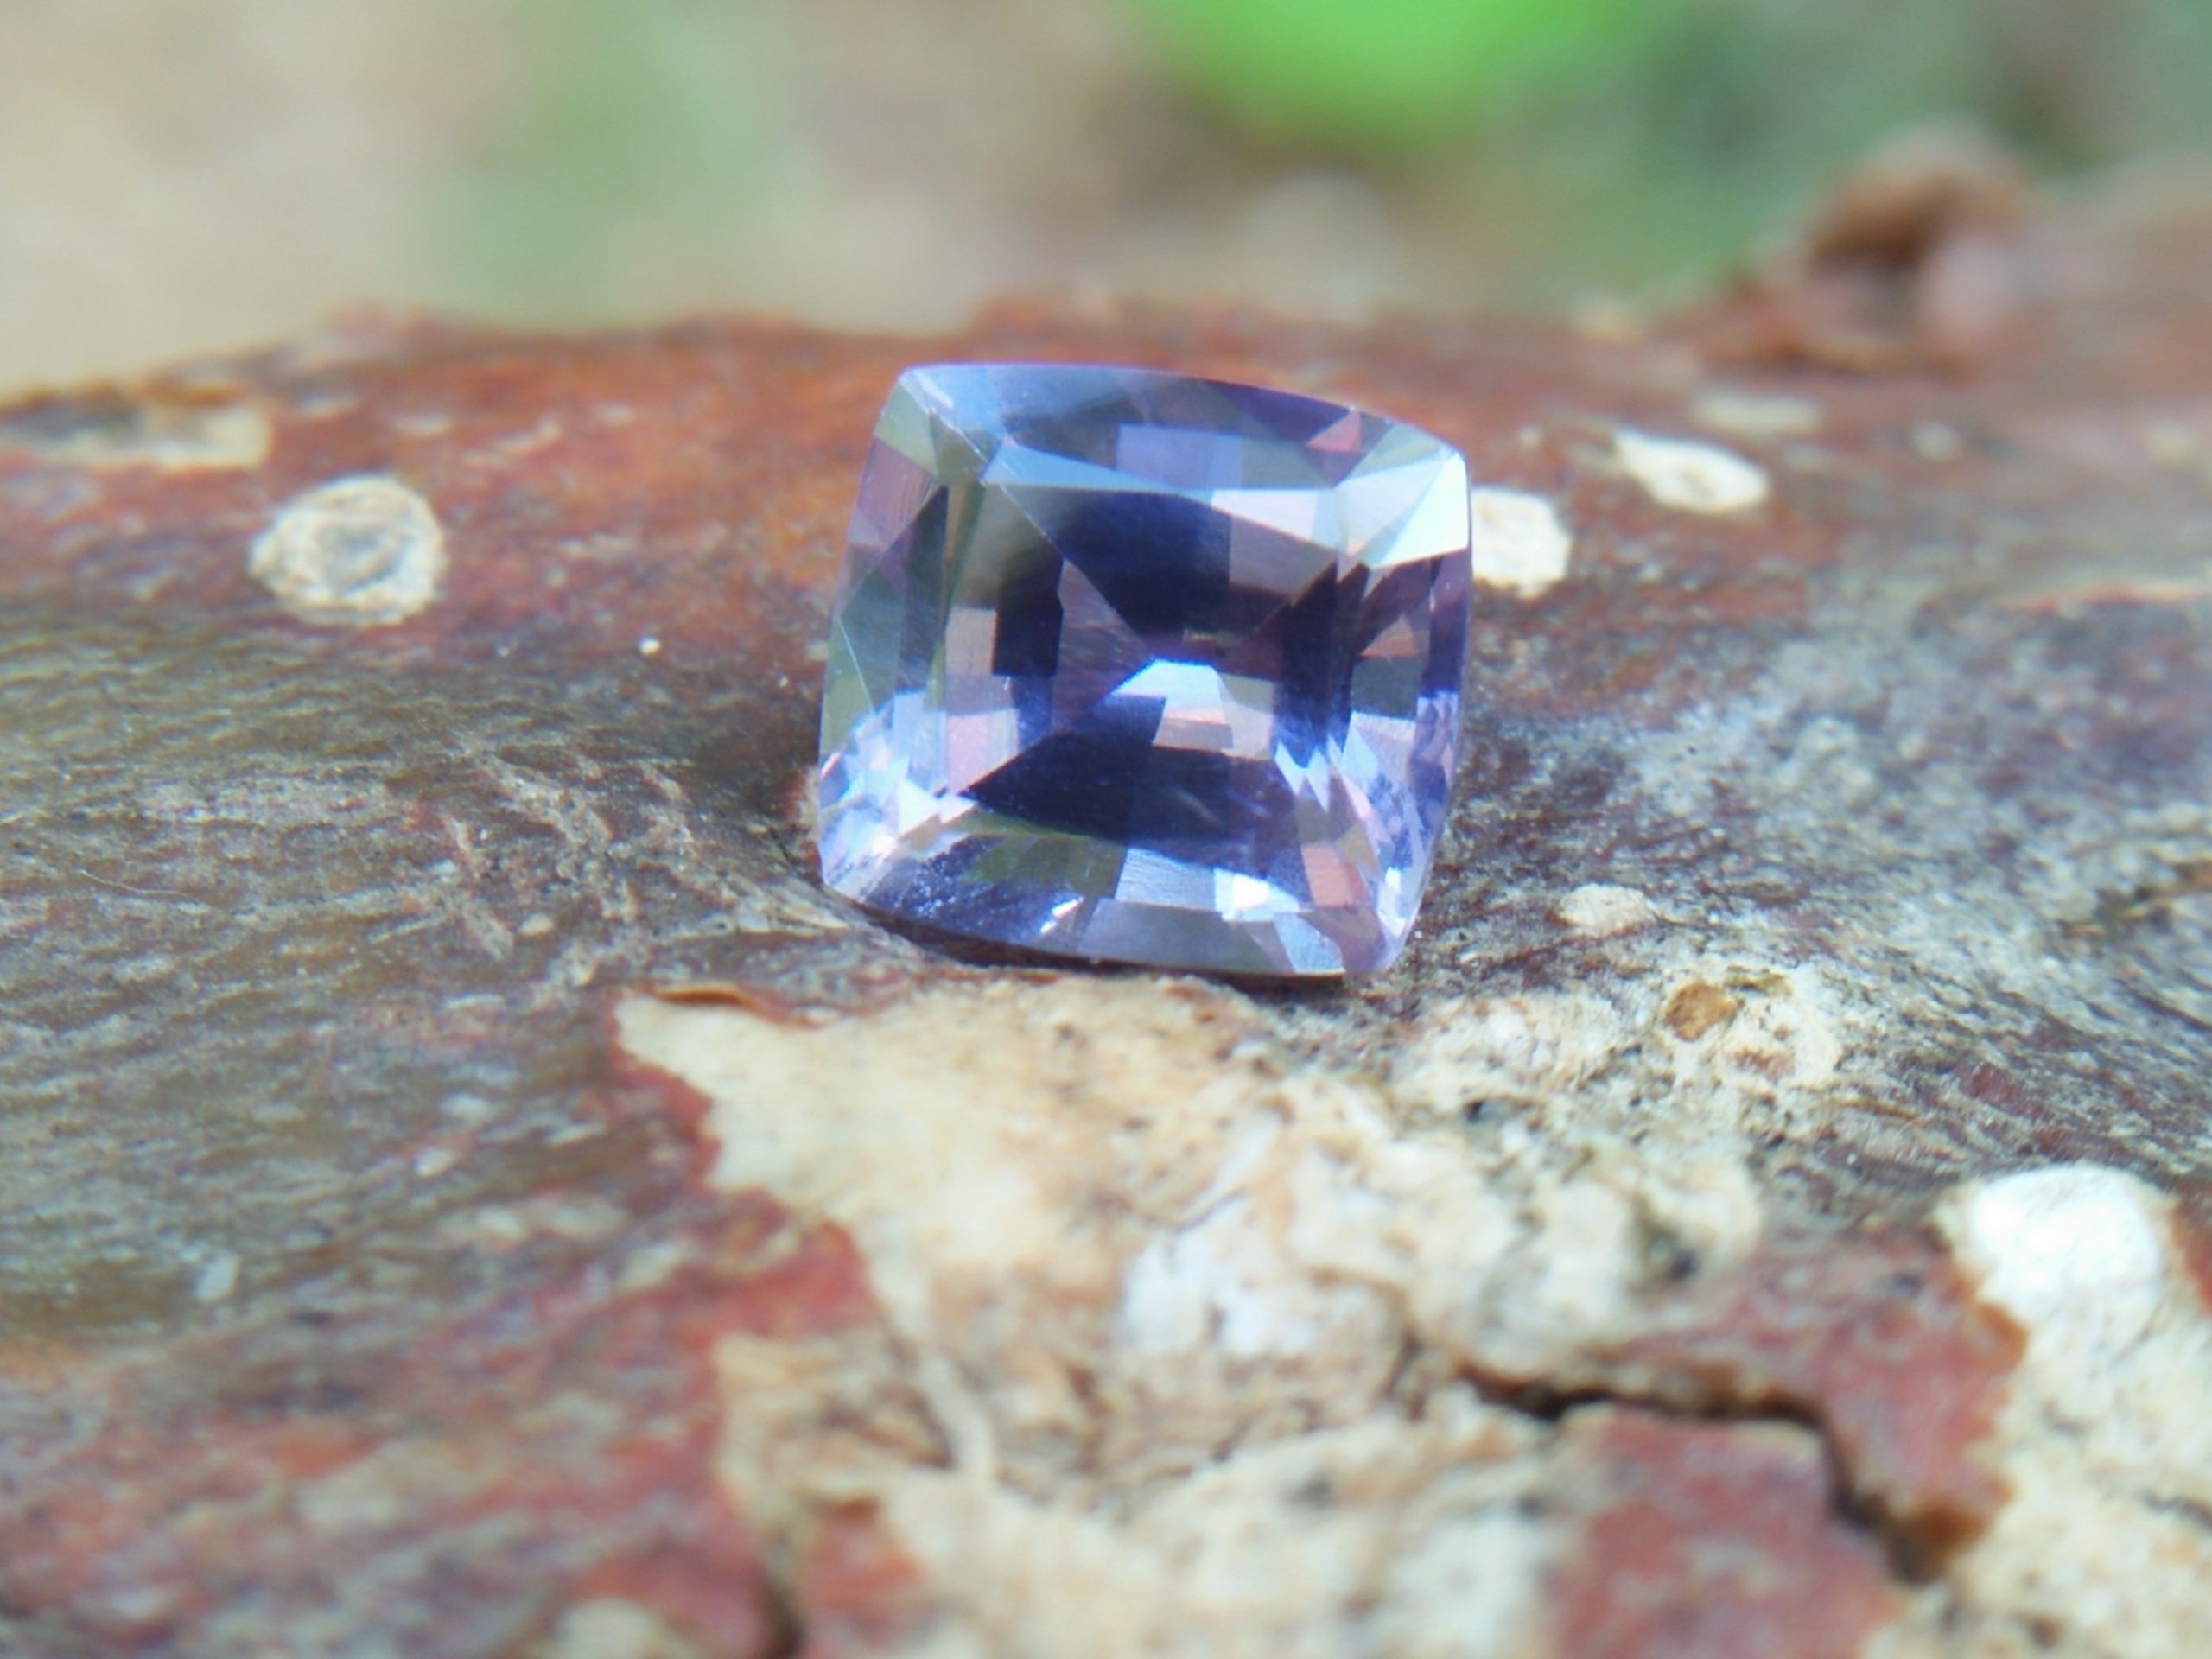 Ceylon Natural Purple Spinel Colour : Purple Shape : Braguette Weight : 1.26 CTS Dimension : 6.3 x 5.7 x 4.3 mm Treatment : None/Unheated Clarity : Clean • CSL - Colored Stone Laboratory Certified ( GIA Alumina Association Member ) • CSL Memo No : 8F117DDD2416